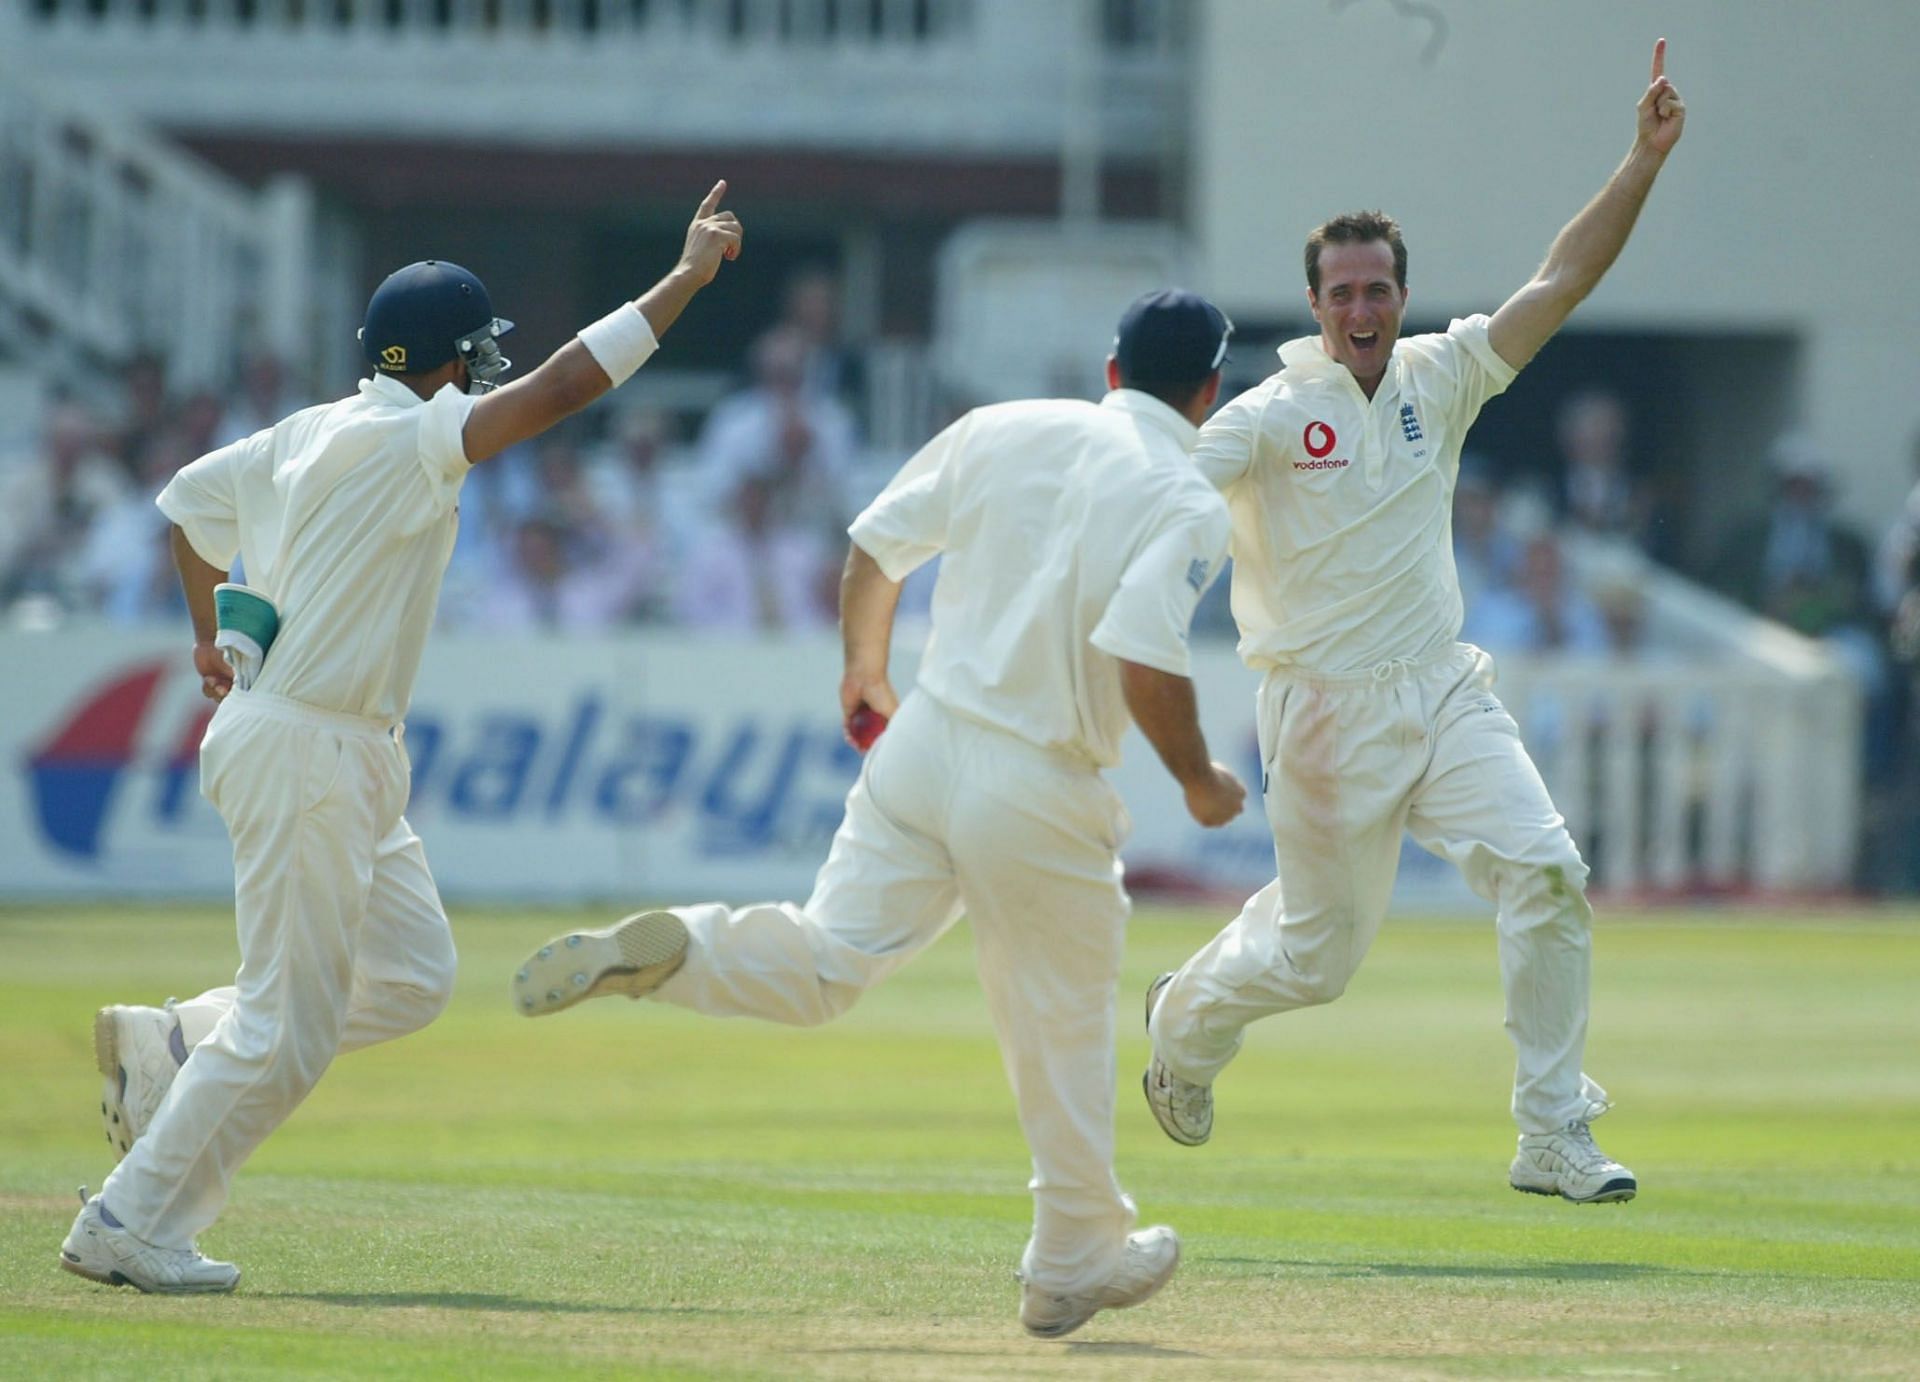 Michael Vaughan celebrates after dismissing Wasim Jaffer in the 2002 Lord&rsquo;s Test. Pic: Getty Images